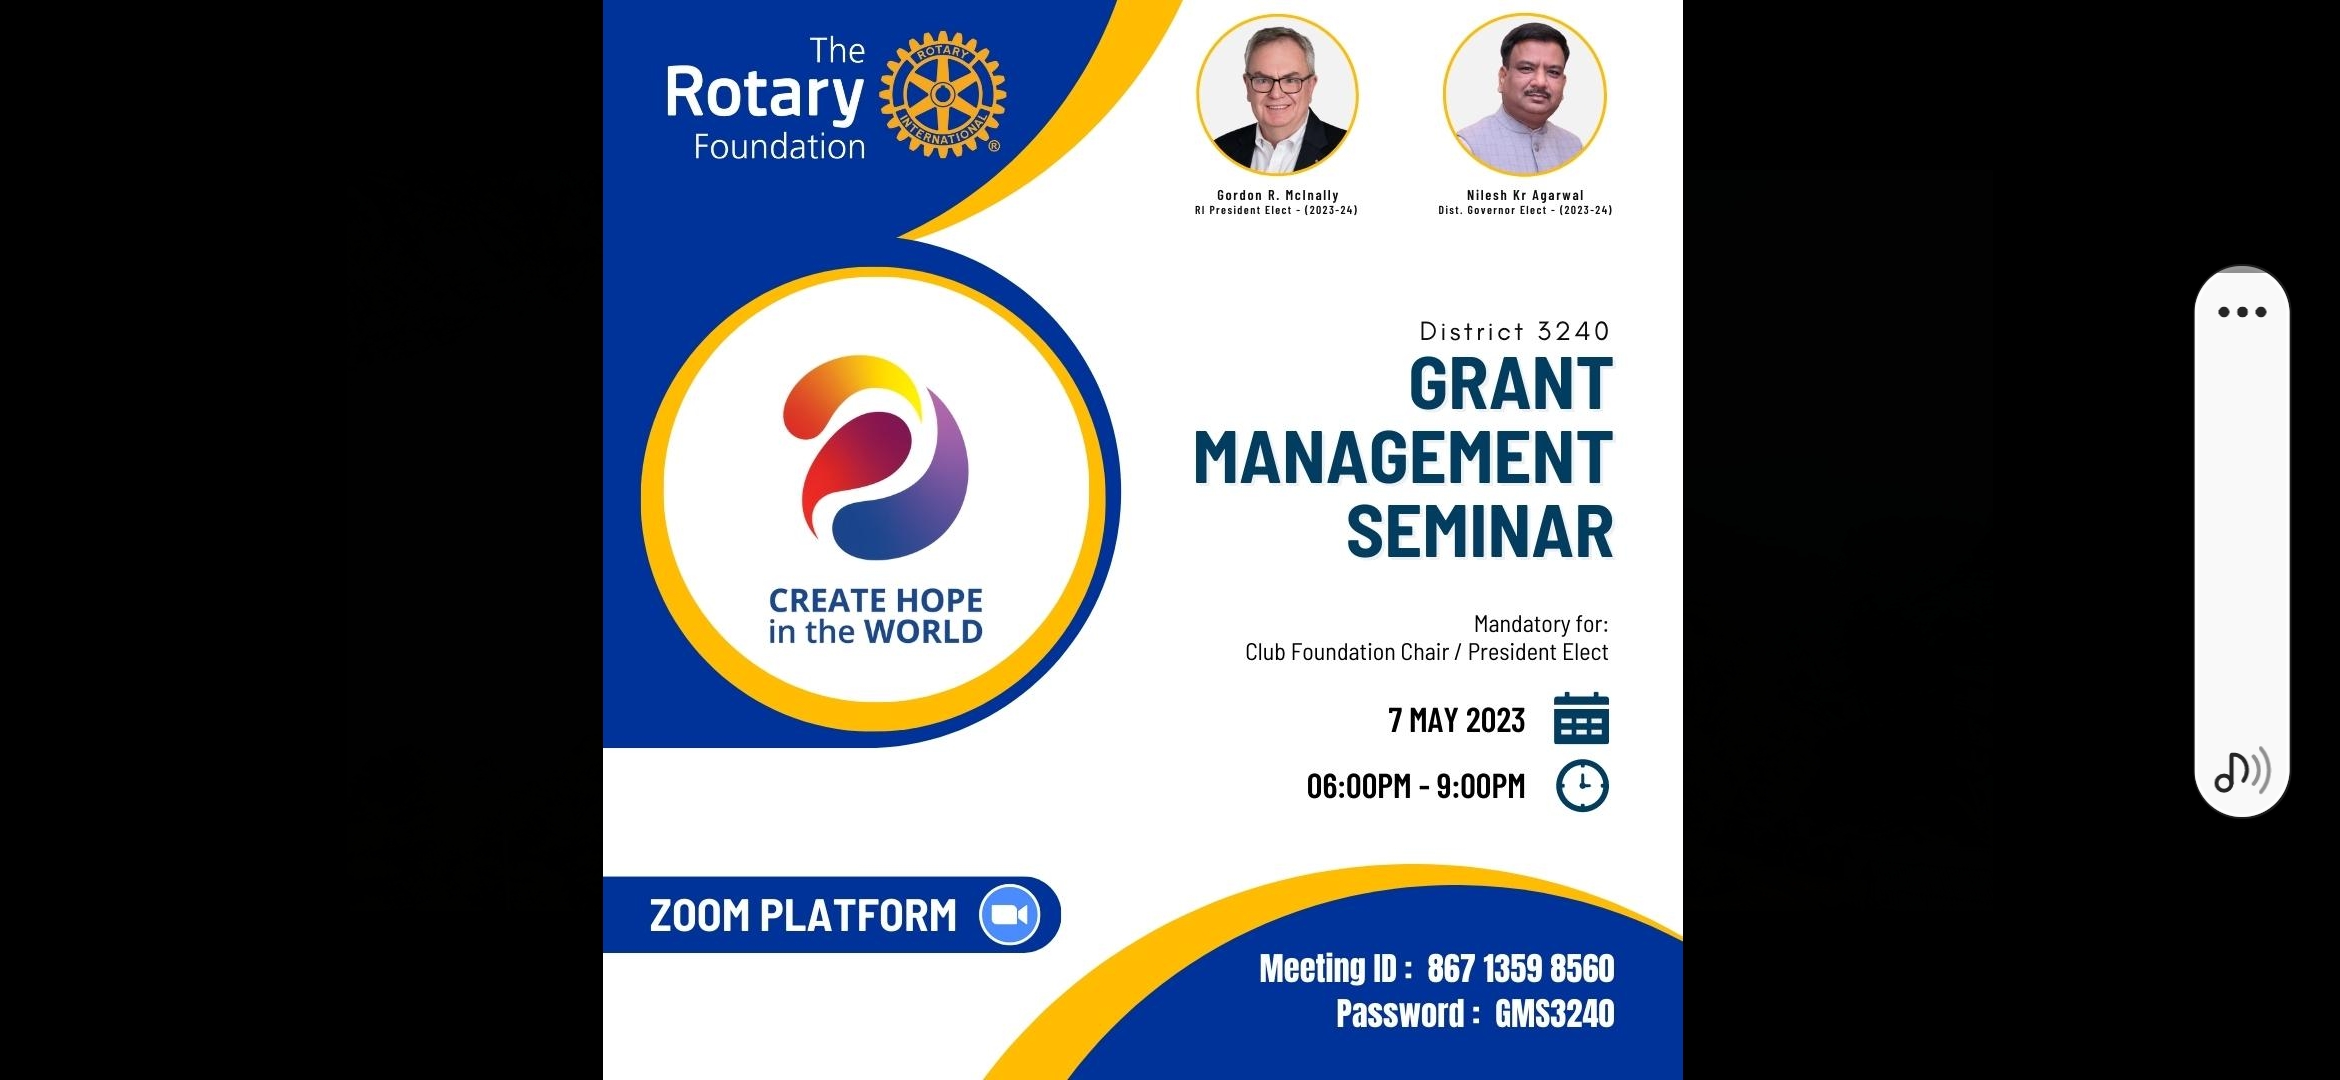 Grant management seminar was attended